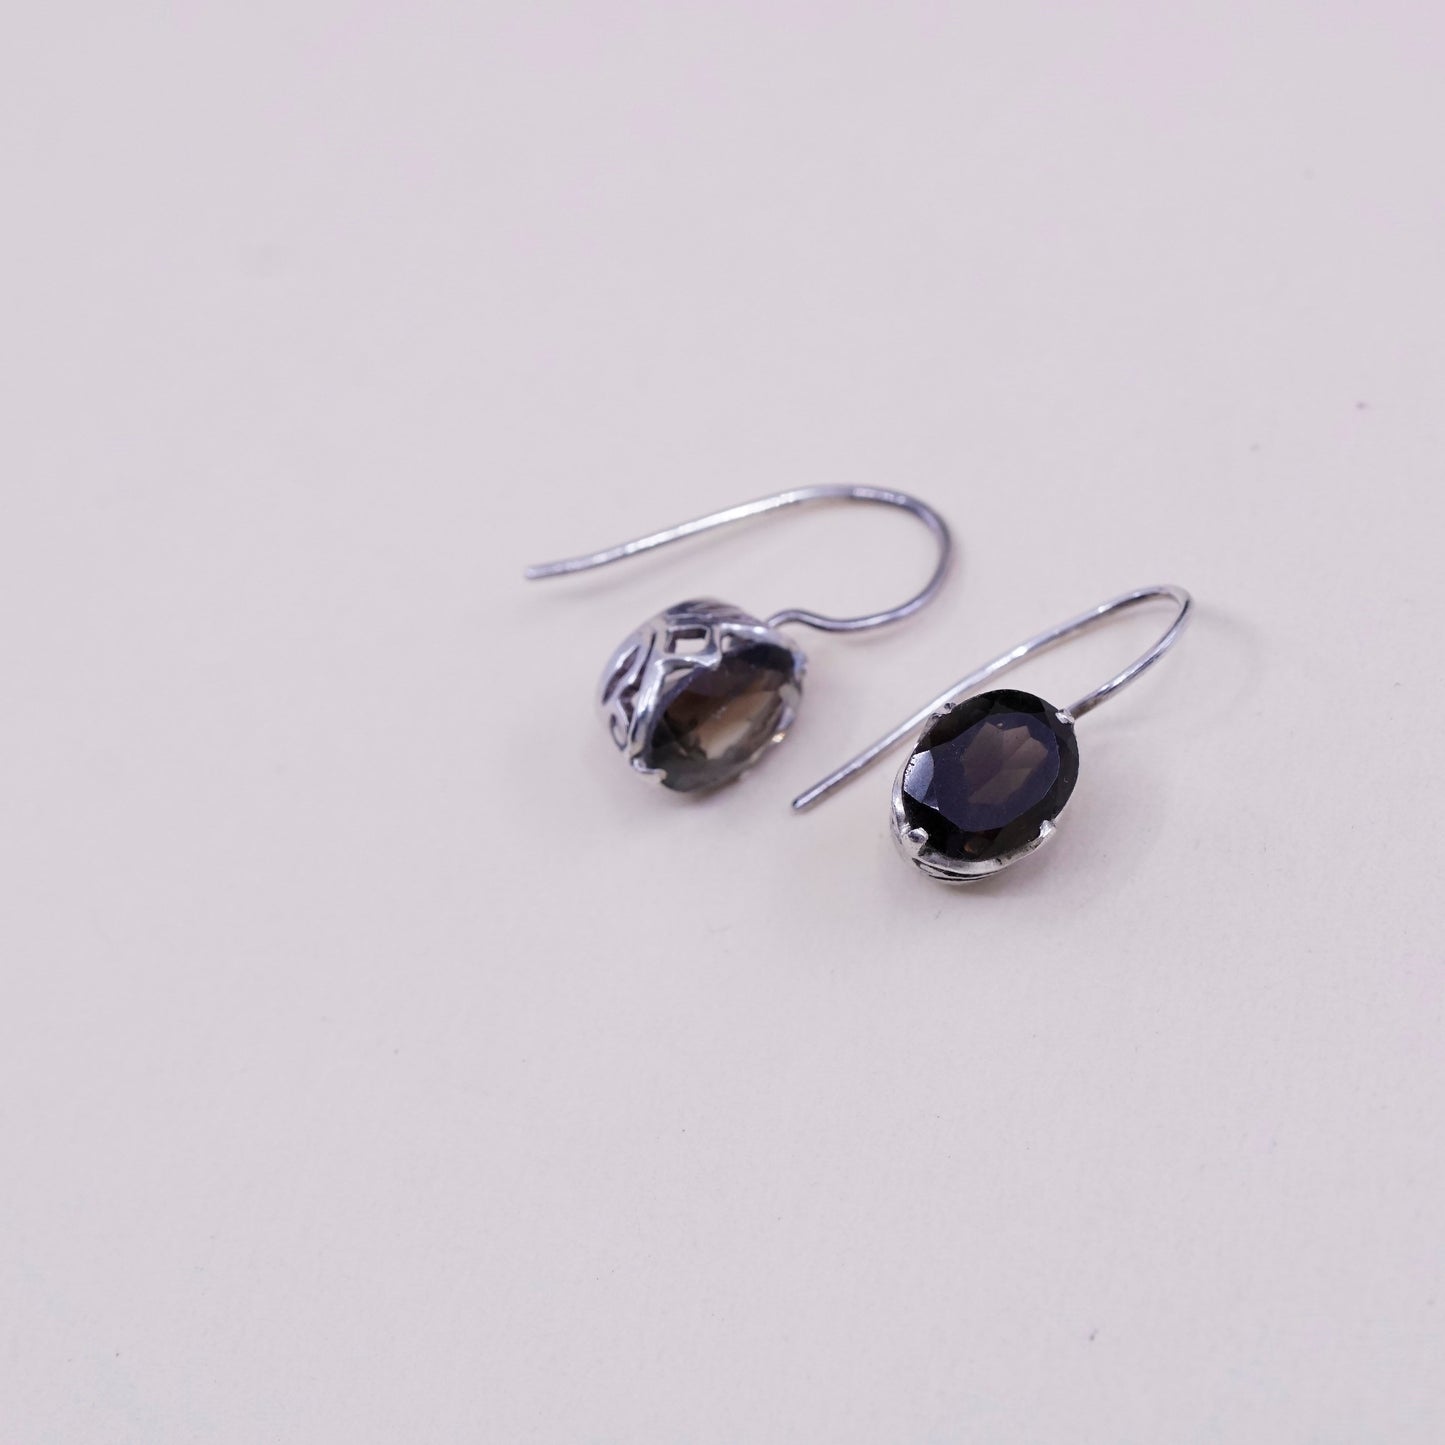 Vintage Sterling 925 silver handmade earrings with smoky topaz beads